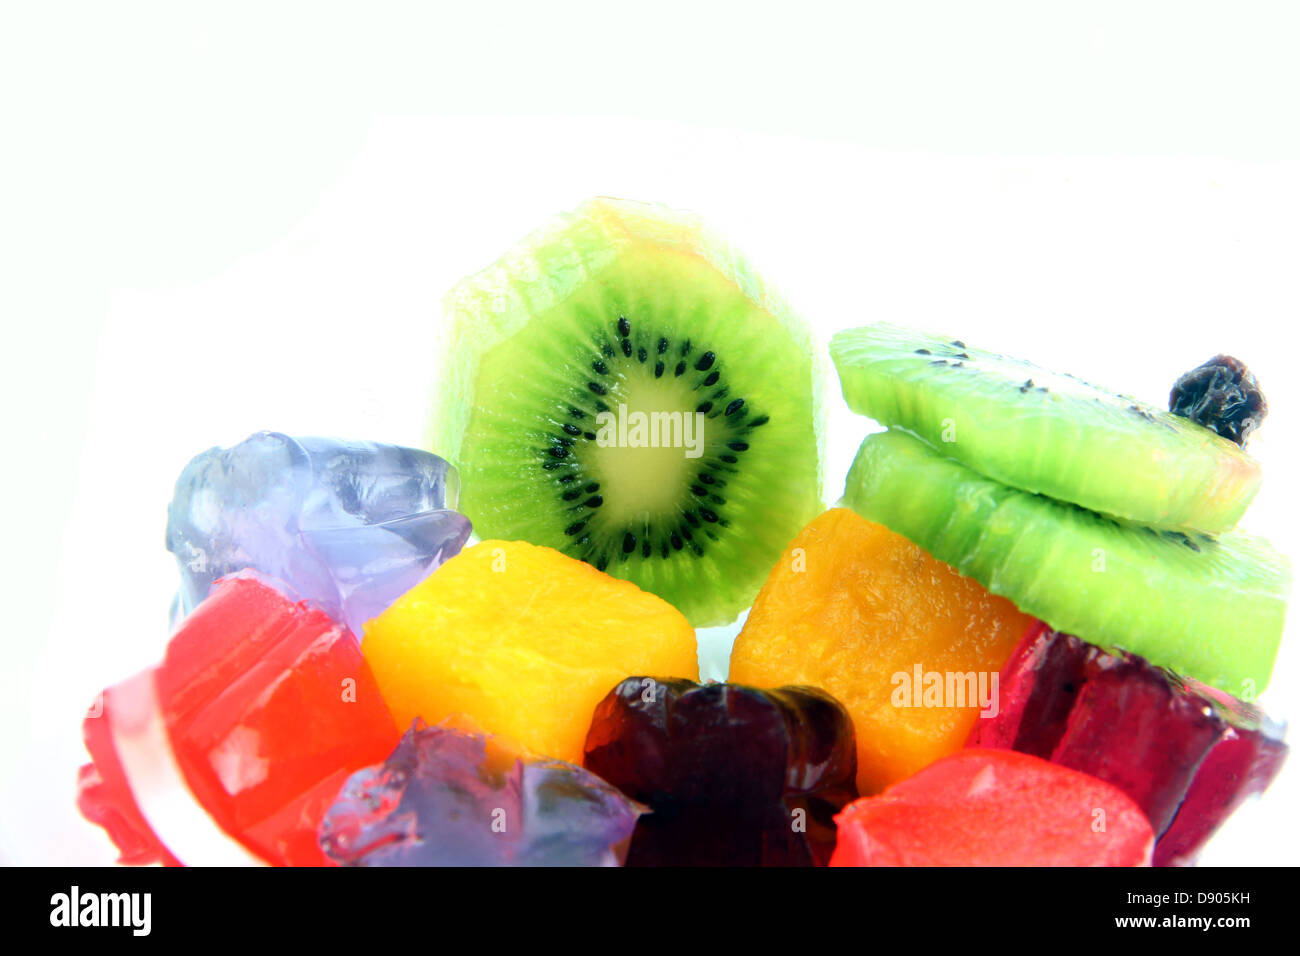 The Fruit and jelly with Colorful. Stock Photo